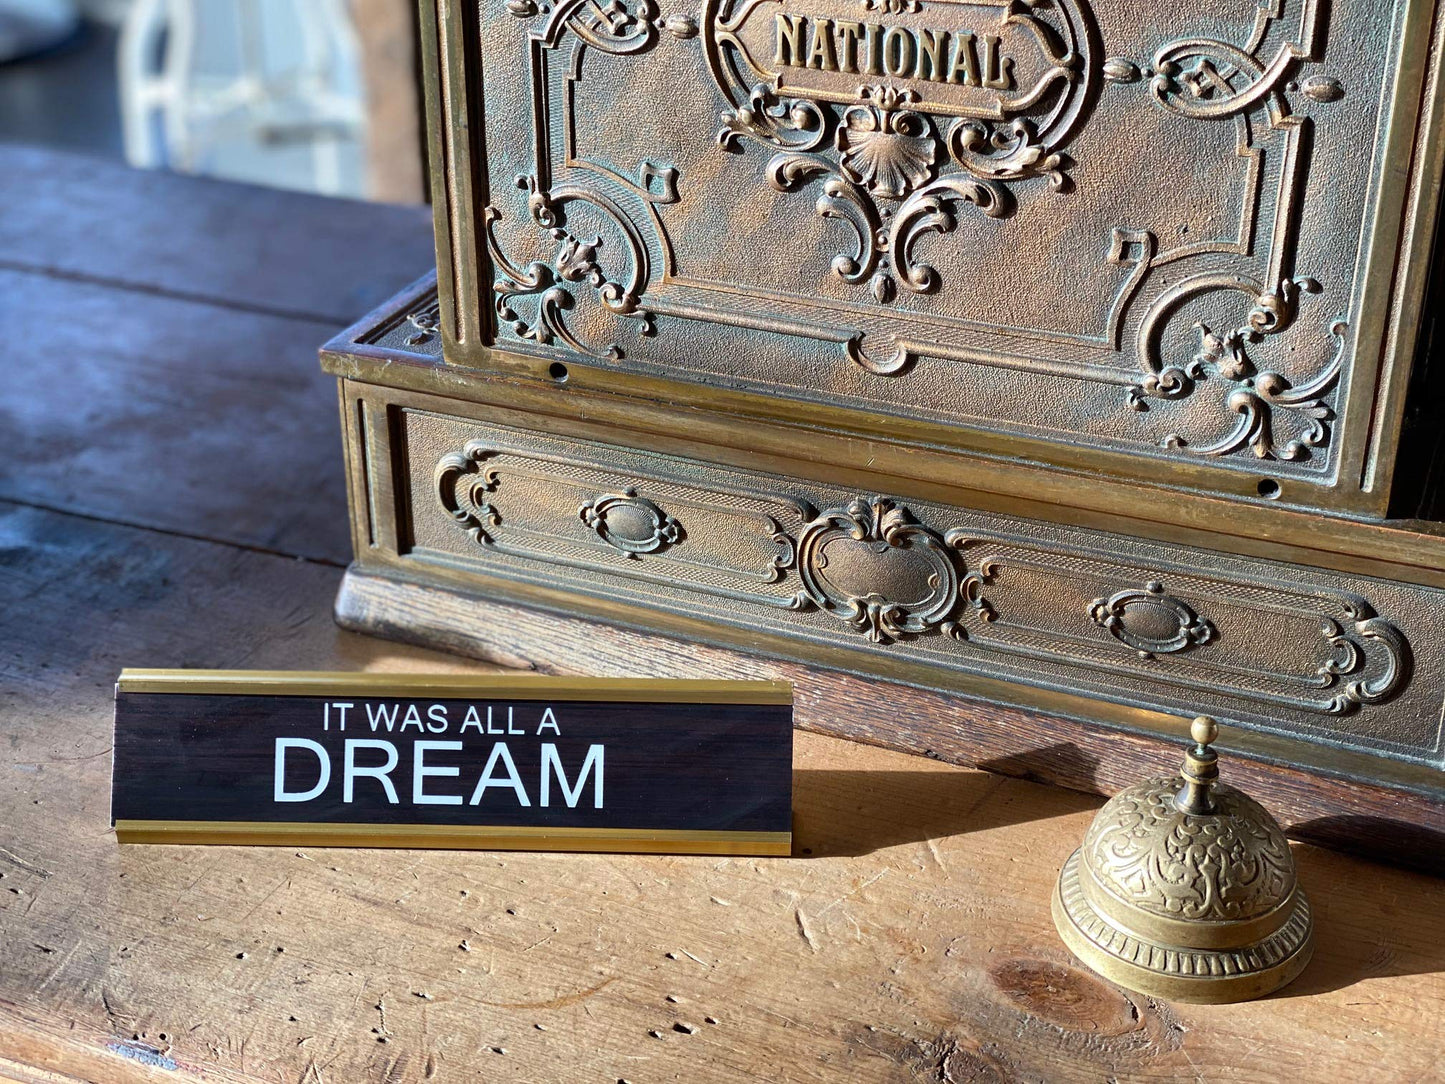 It Was All a DREAM - Funny Desk Name Plate